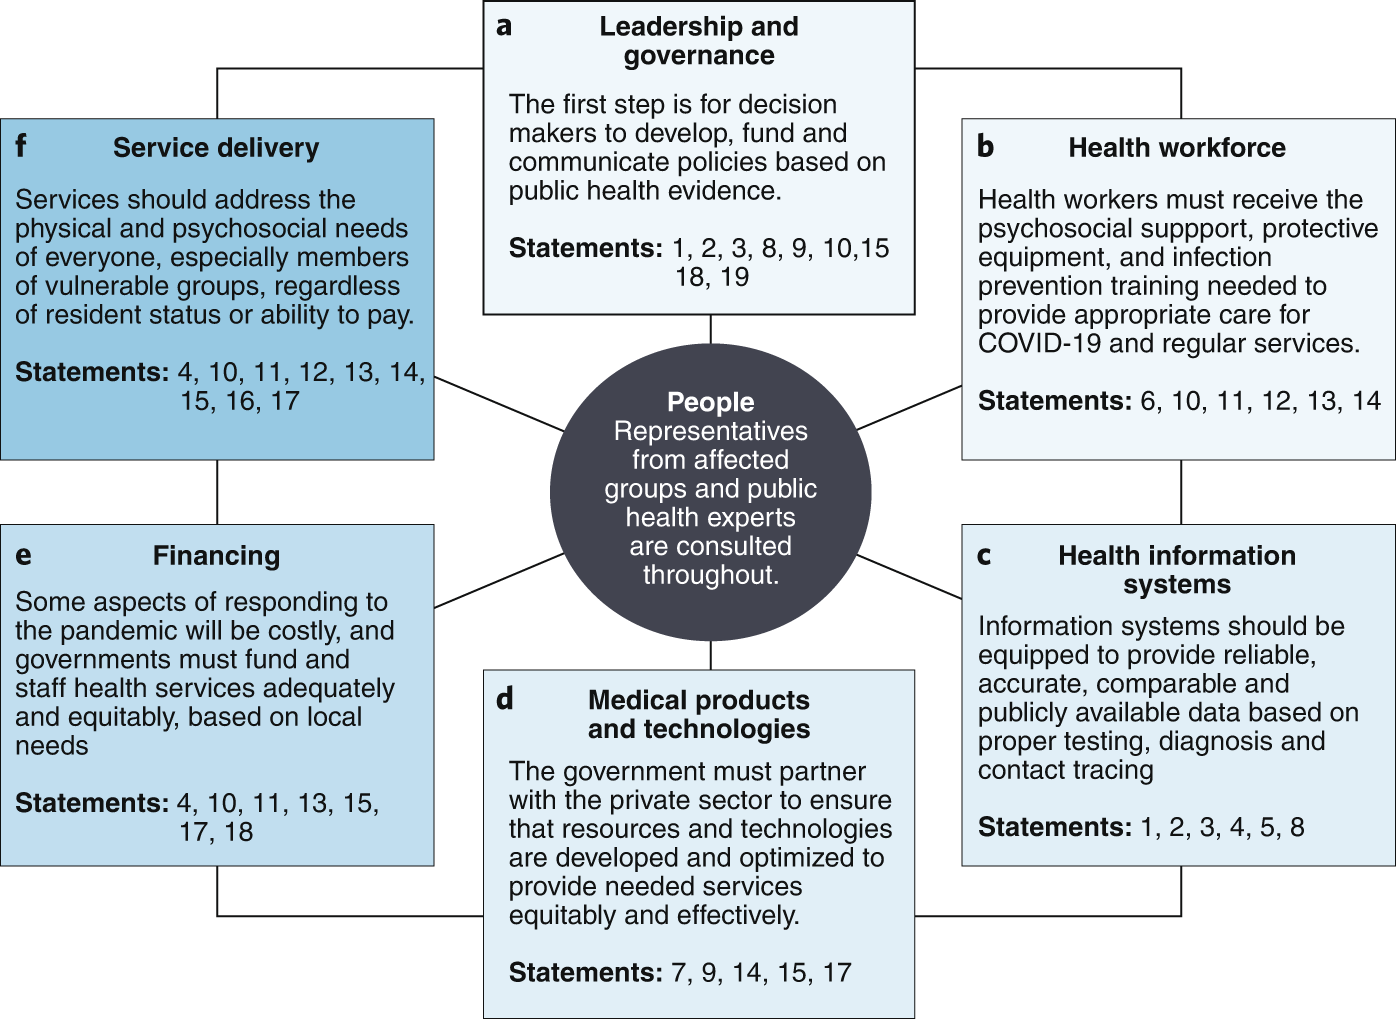 Assessing COVID-19 pandemic policies and behaviours and their